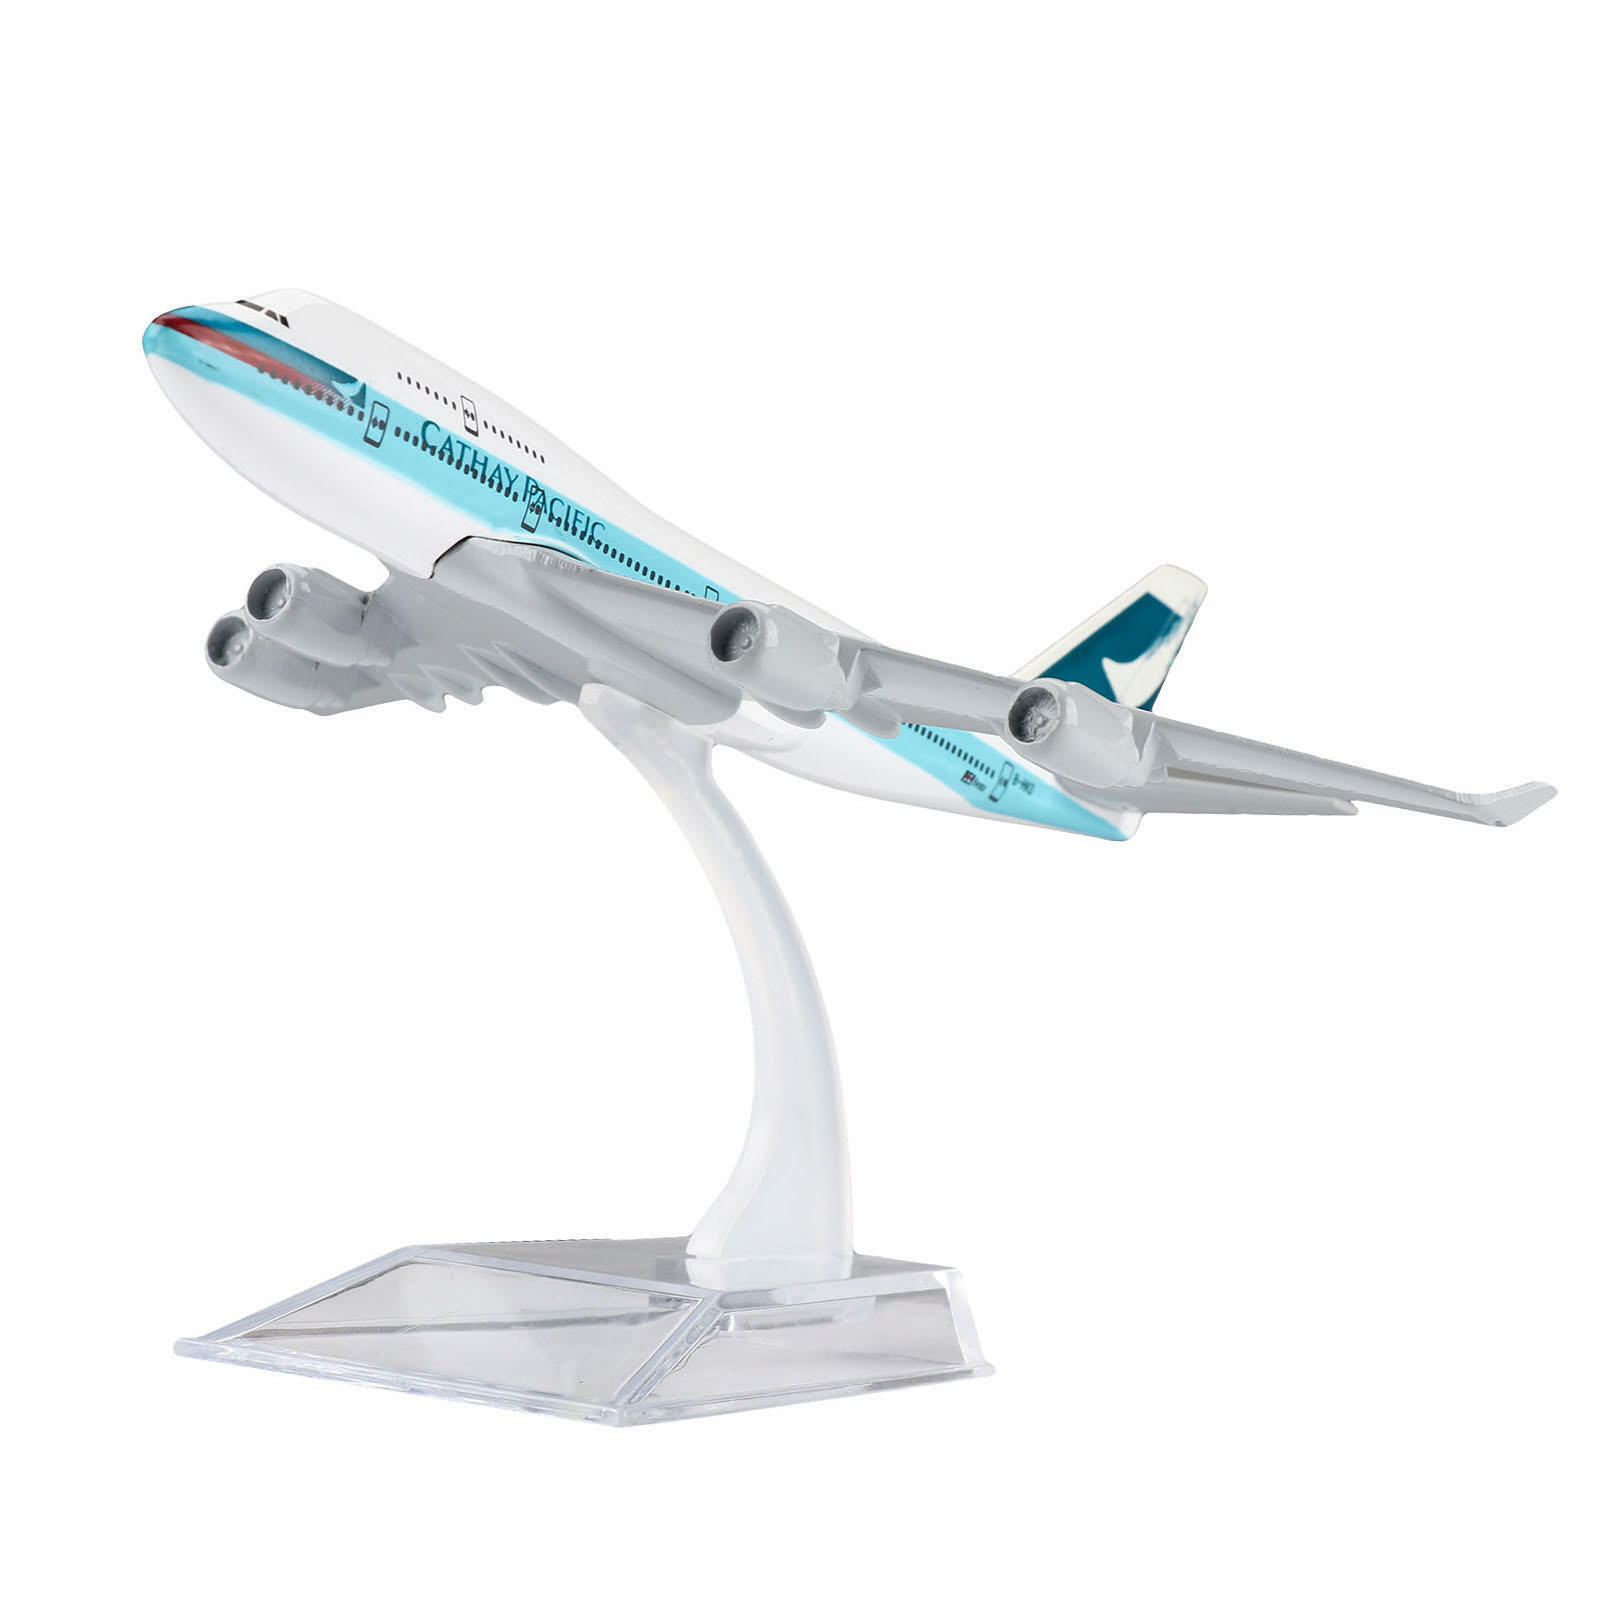 16cm Aircraft Plane Boeing 747 Cathay Pacific Airlines Aircraft Diecast Model